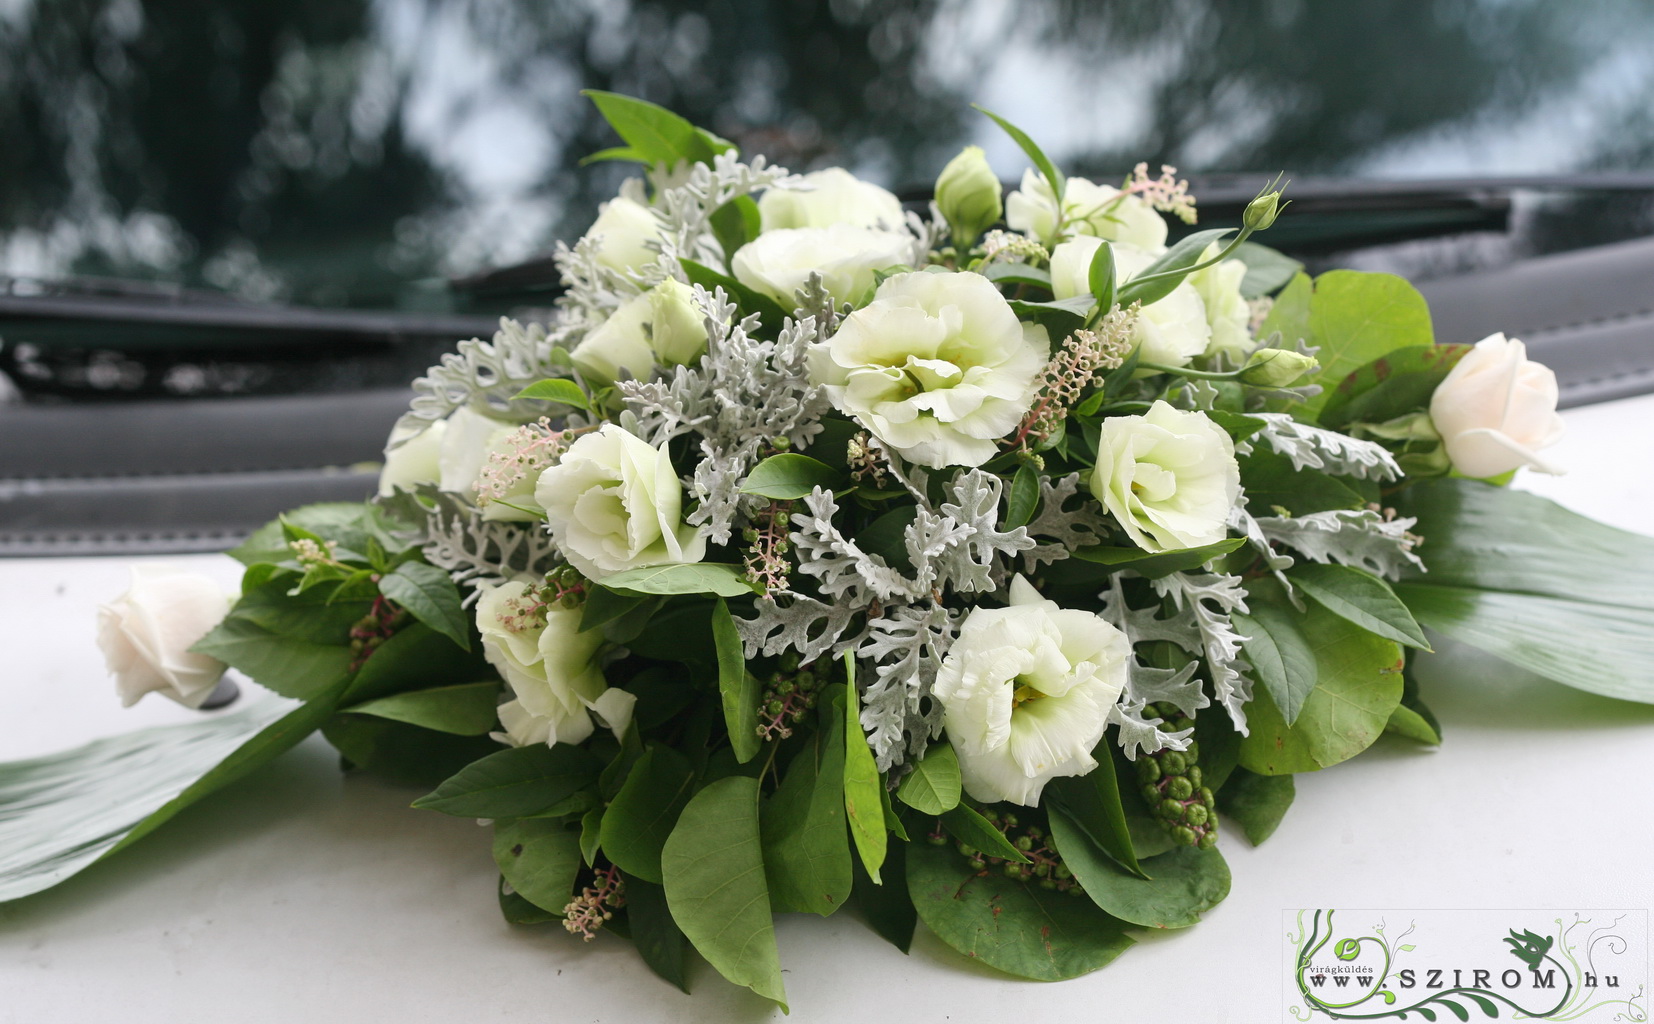 flower delivery Budapest - oval car flower arrangement with lisianthius and senecio, only in summer (white, silver)